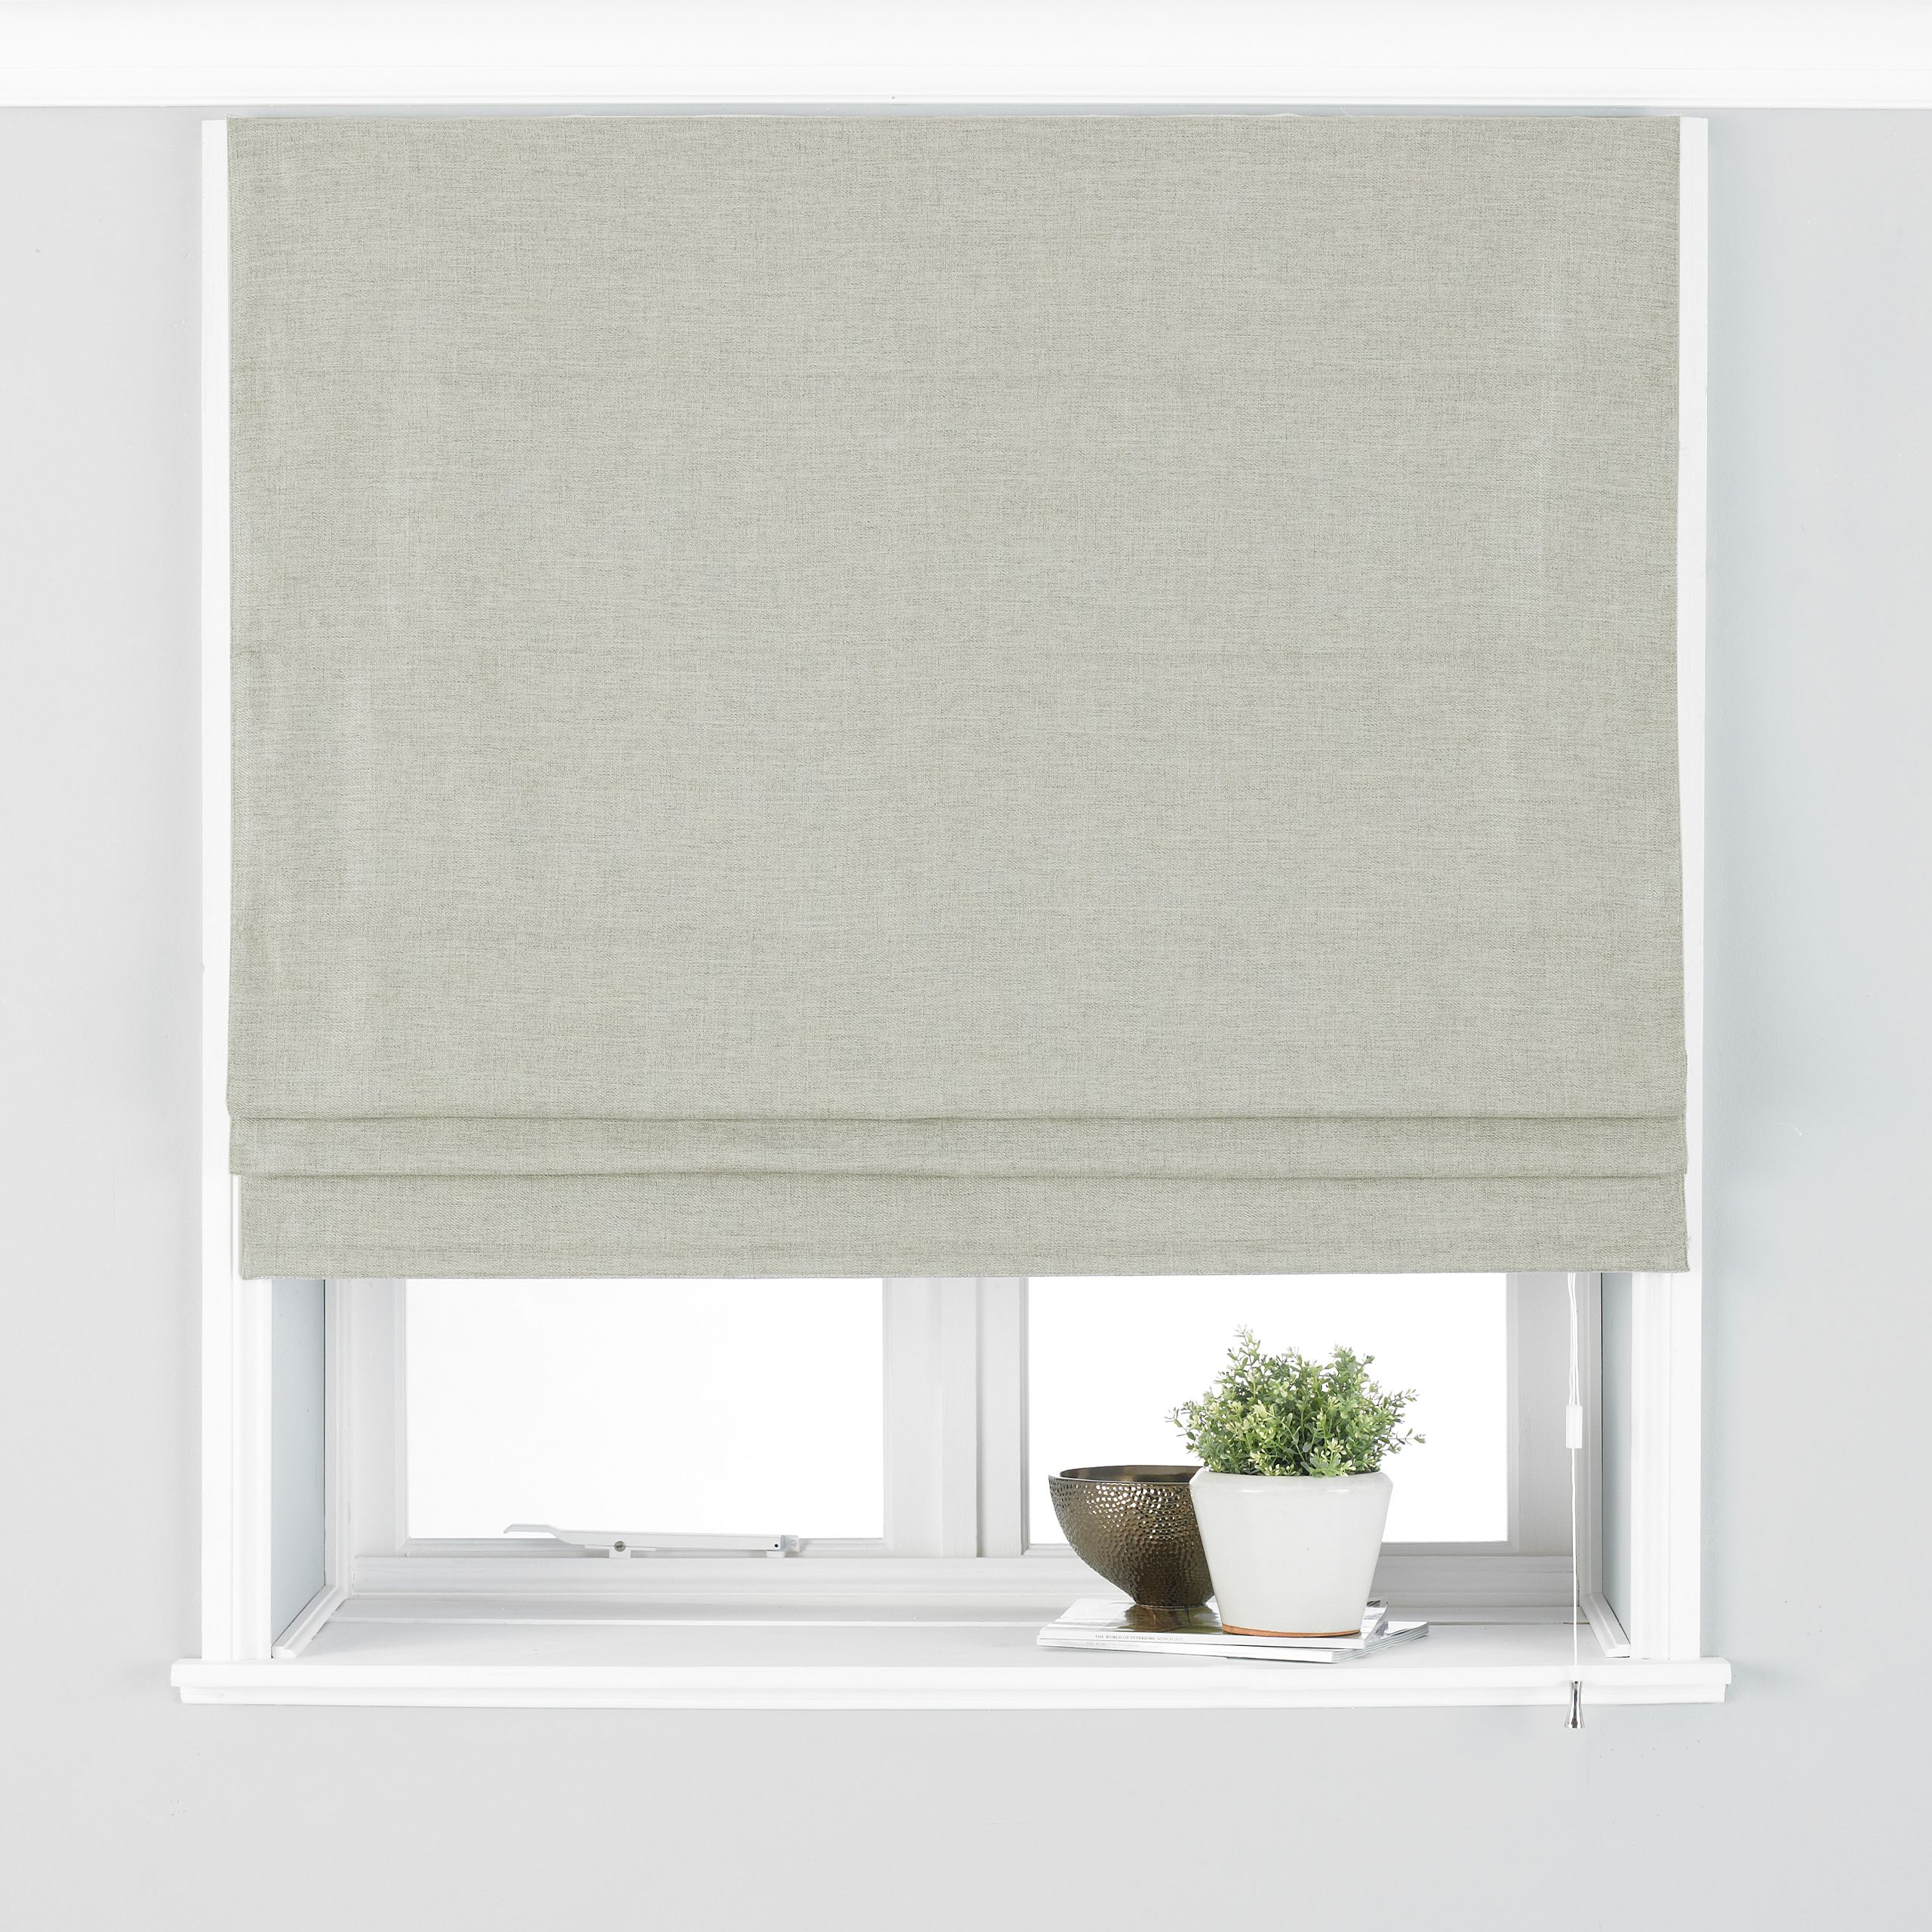 These Roman Blinds are available in a range of earthy tones, with its twill fabric front; this design is excellent when it comes to it’s room darkening qualities and hard-wearing proporties. Made of 100% Polyester this blind design doesn't stain easily. The Atlantic Blind set includes Fixing brackets, Screws, Wall Plugs, Adjustable pull cord with built in child safety devise and easy to follow instructions.